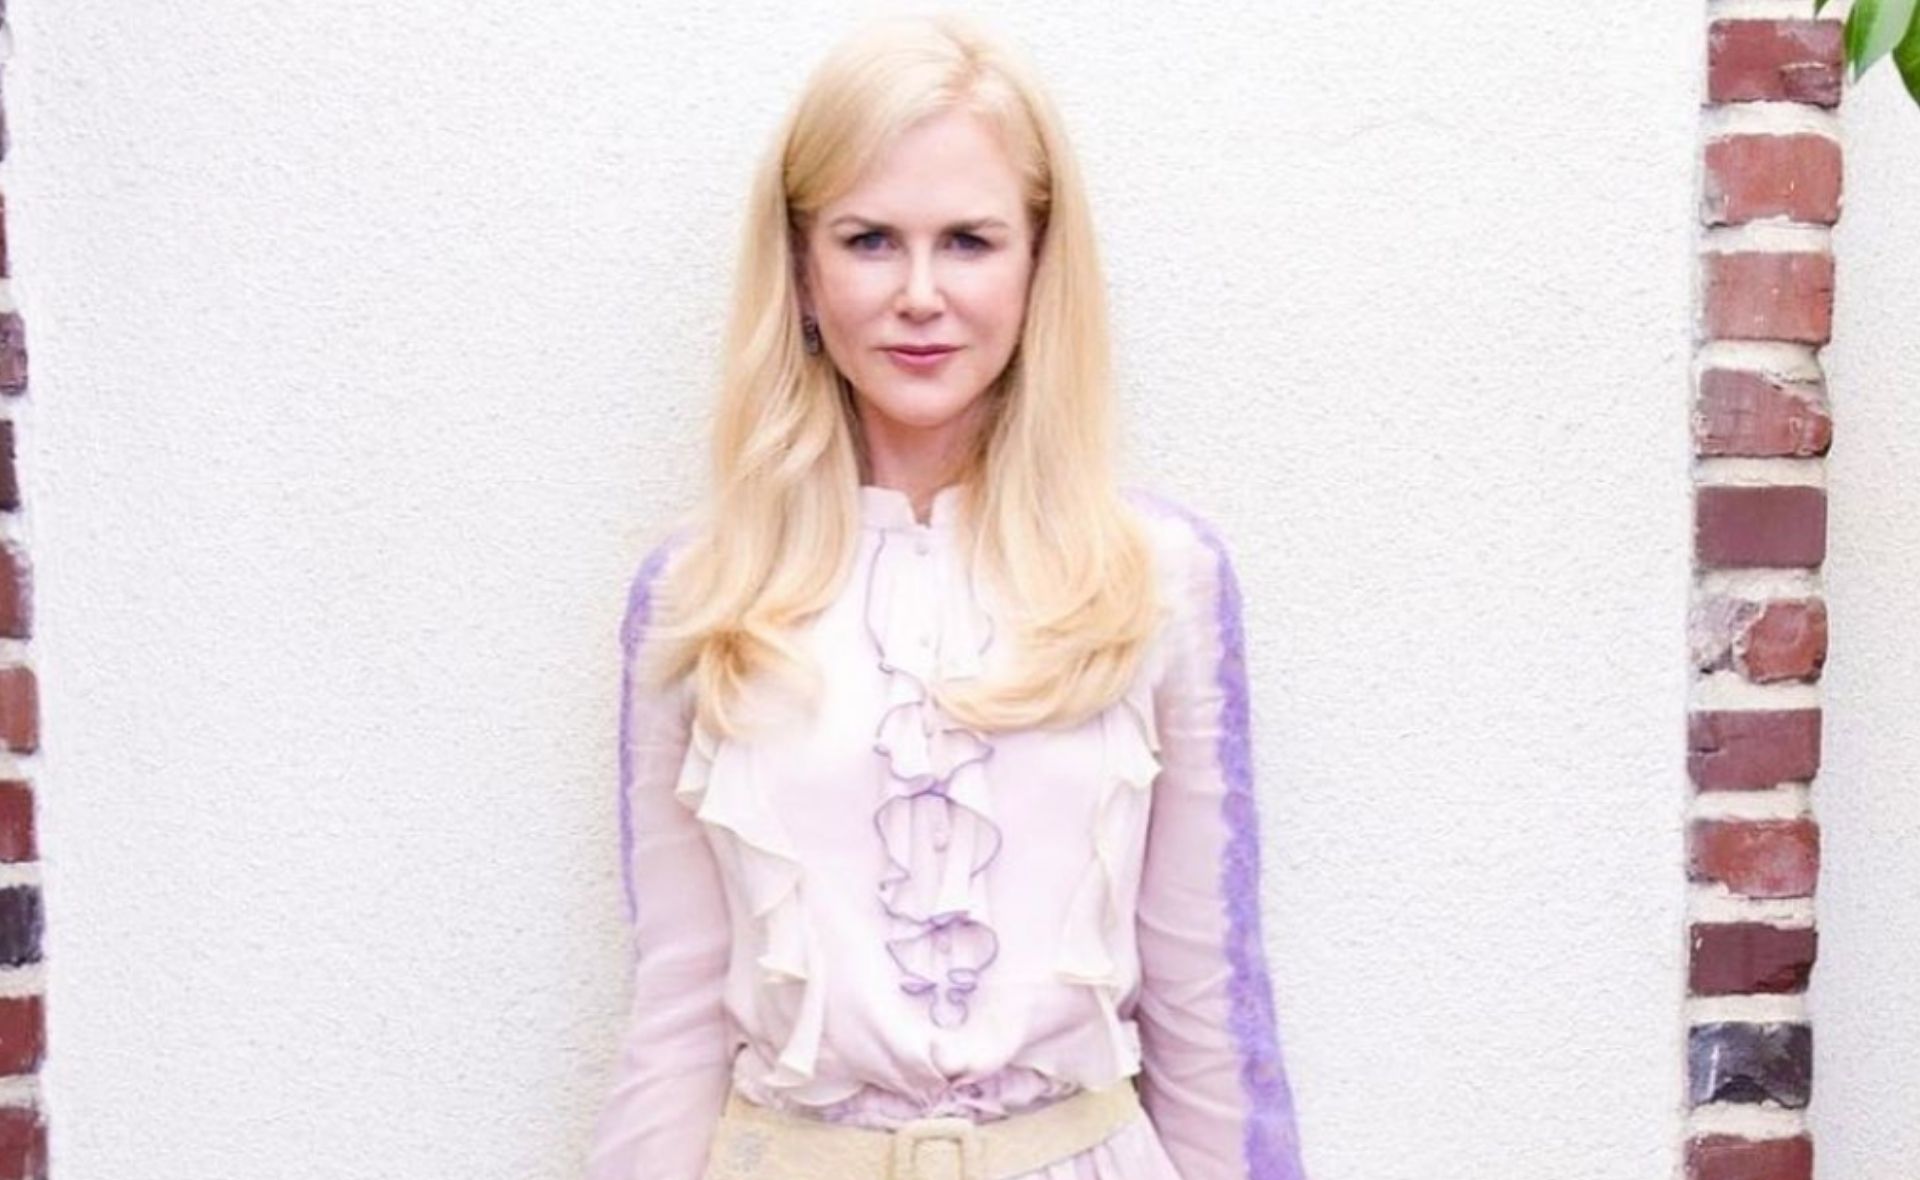 Nicole Kidman debuts a daring hair transformation unlike anything we’ve seen from the star before